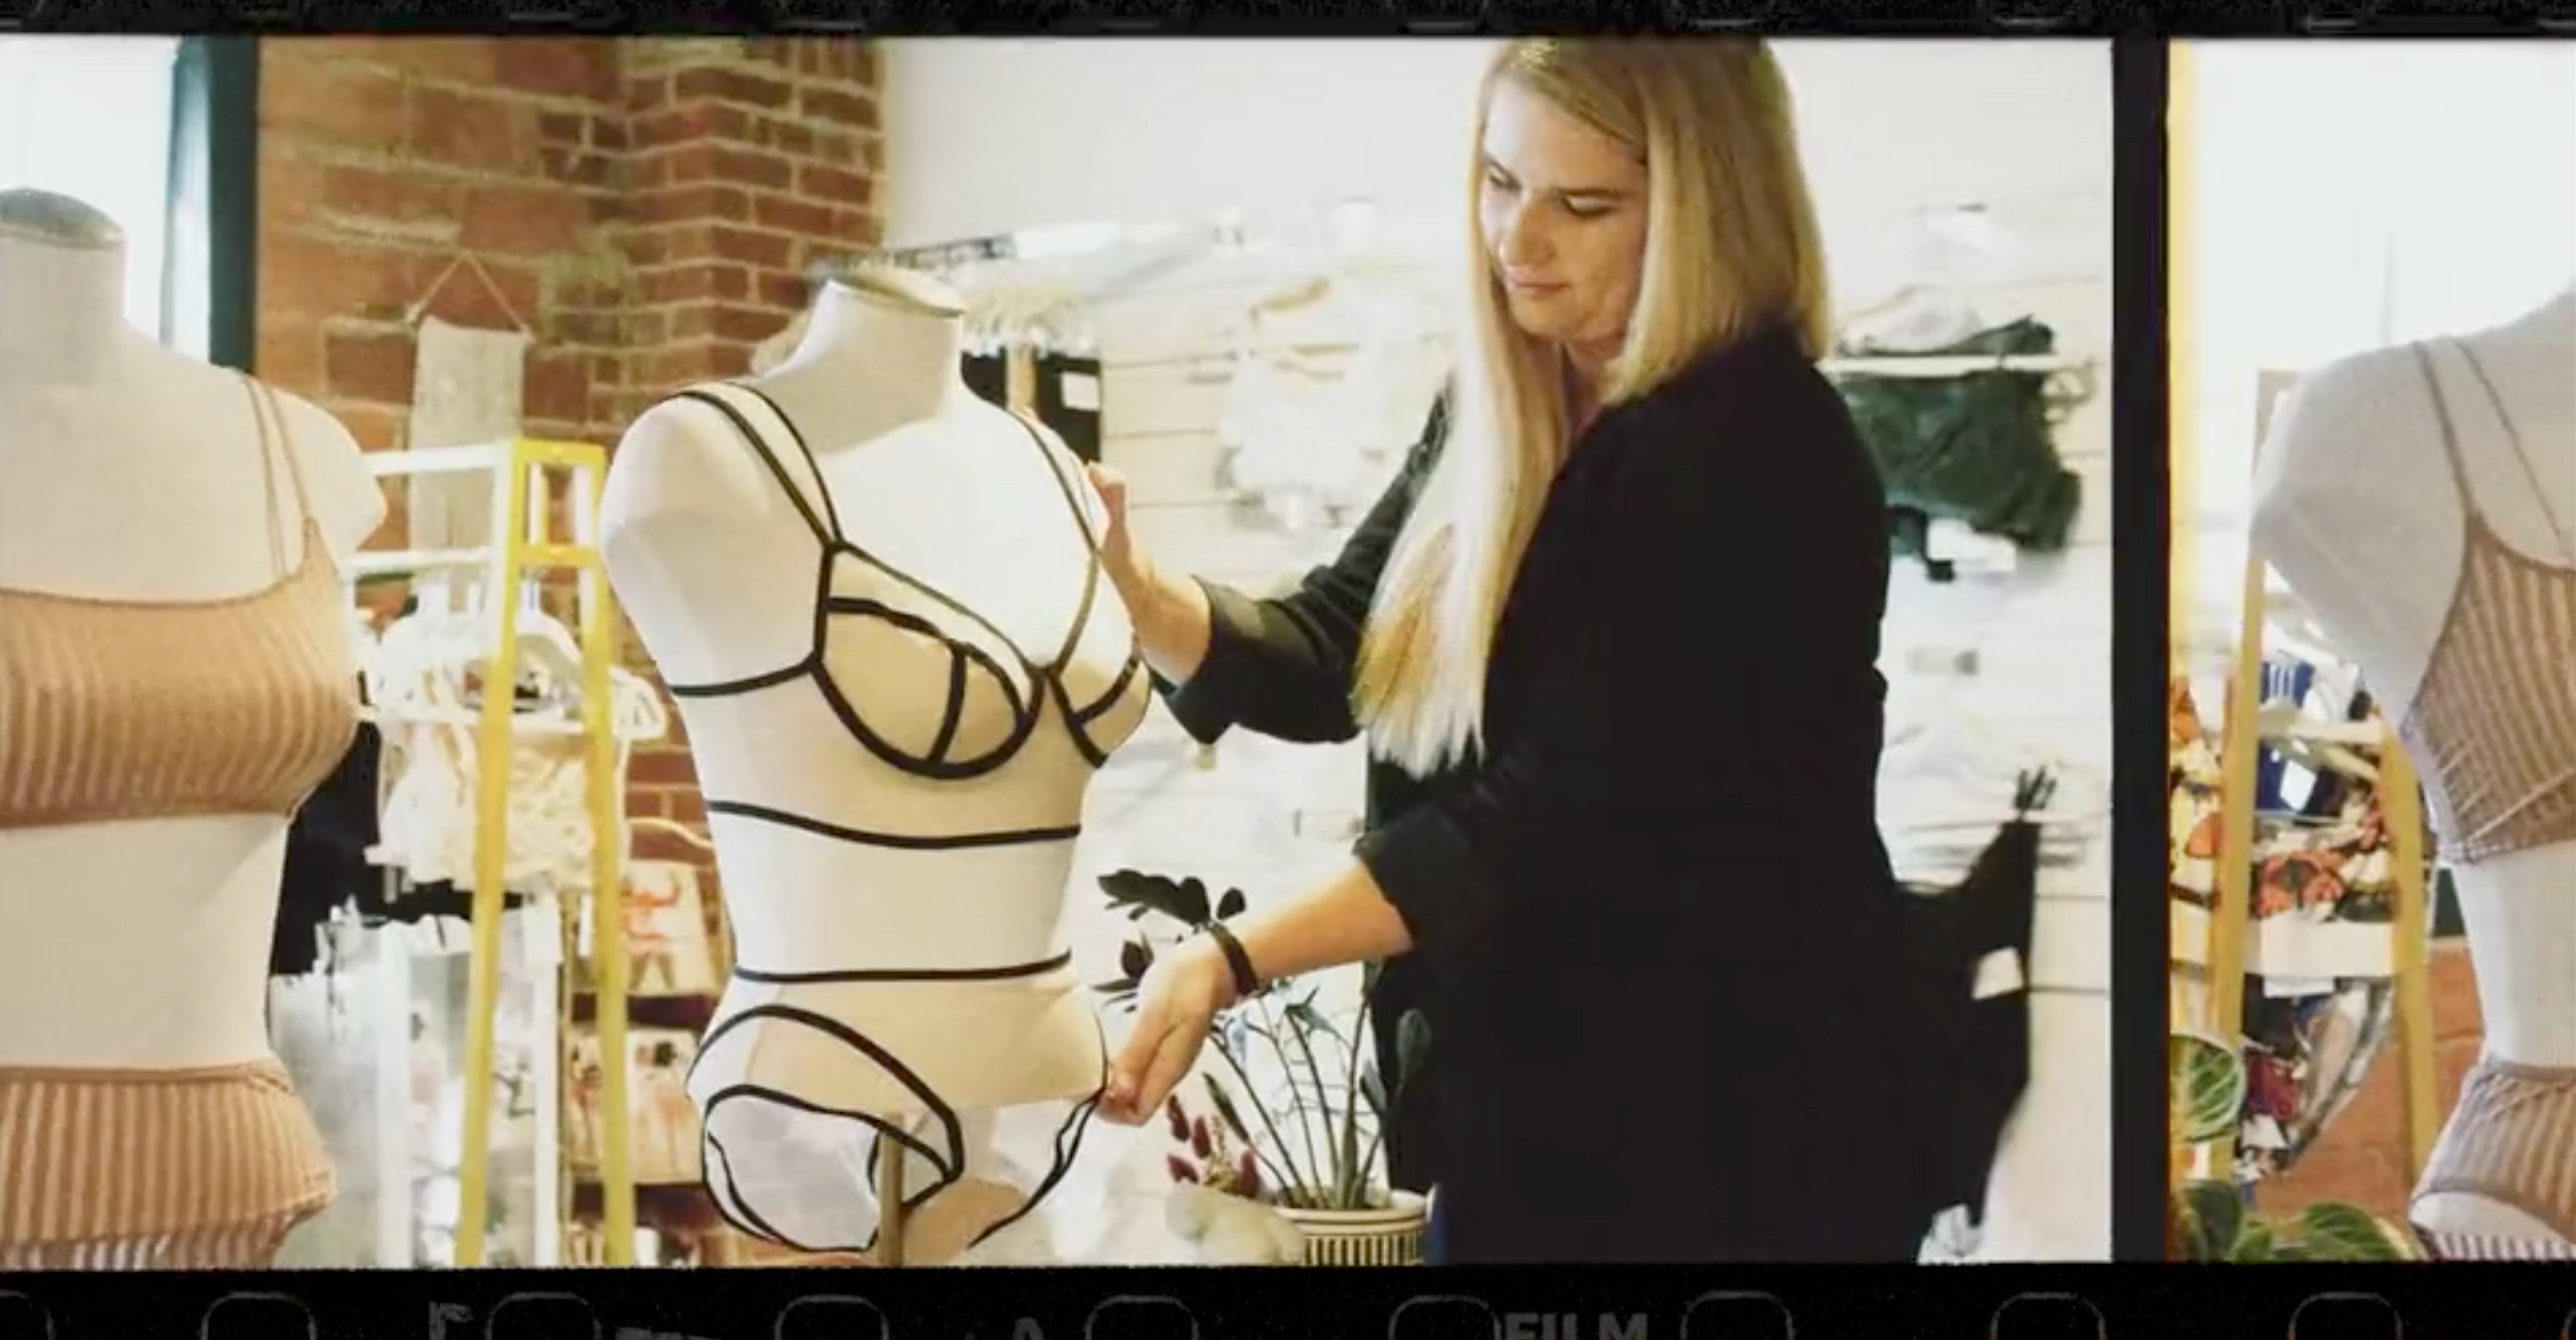 Load video: Video of Society Lingerie highlighting pieces in the boutique and how amazing people feel